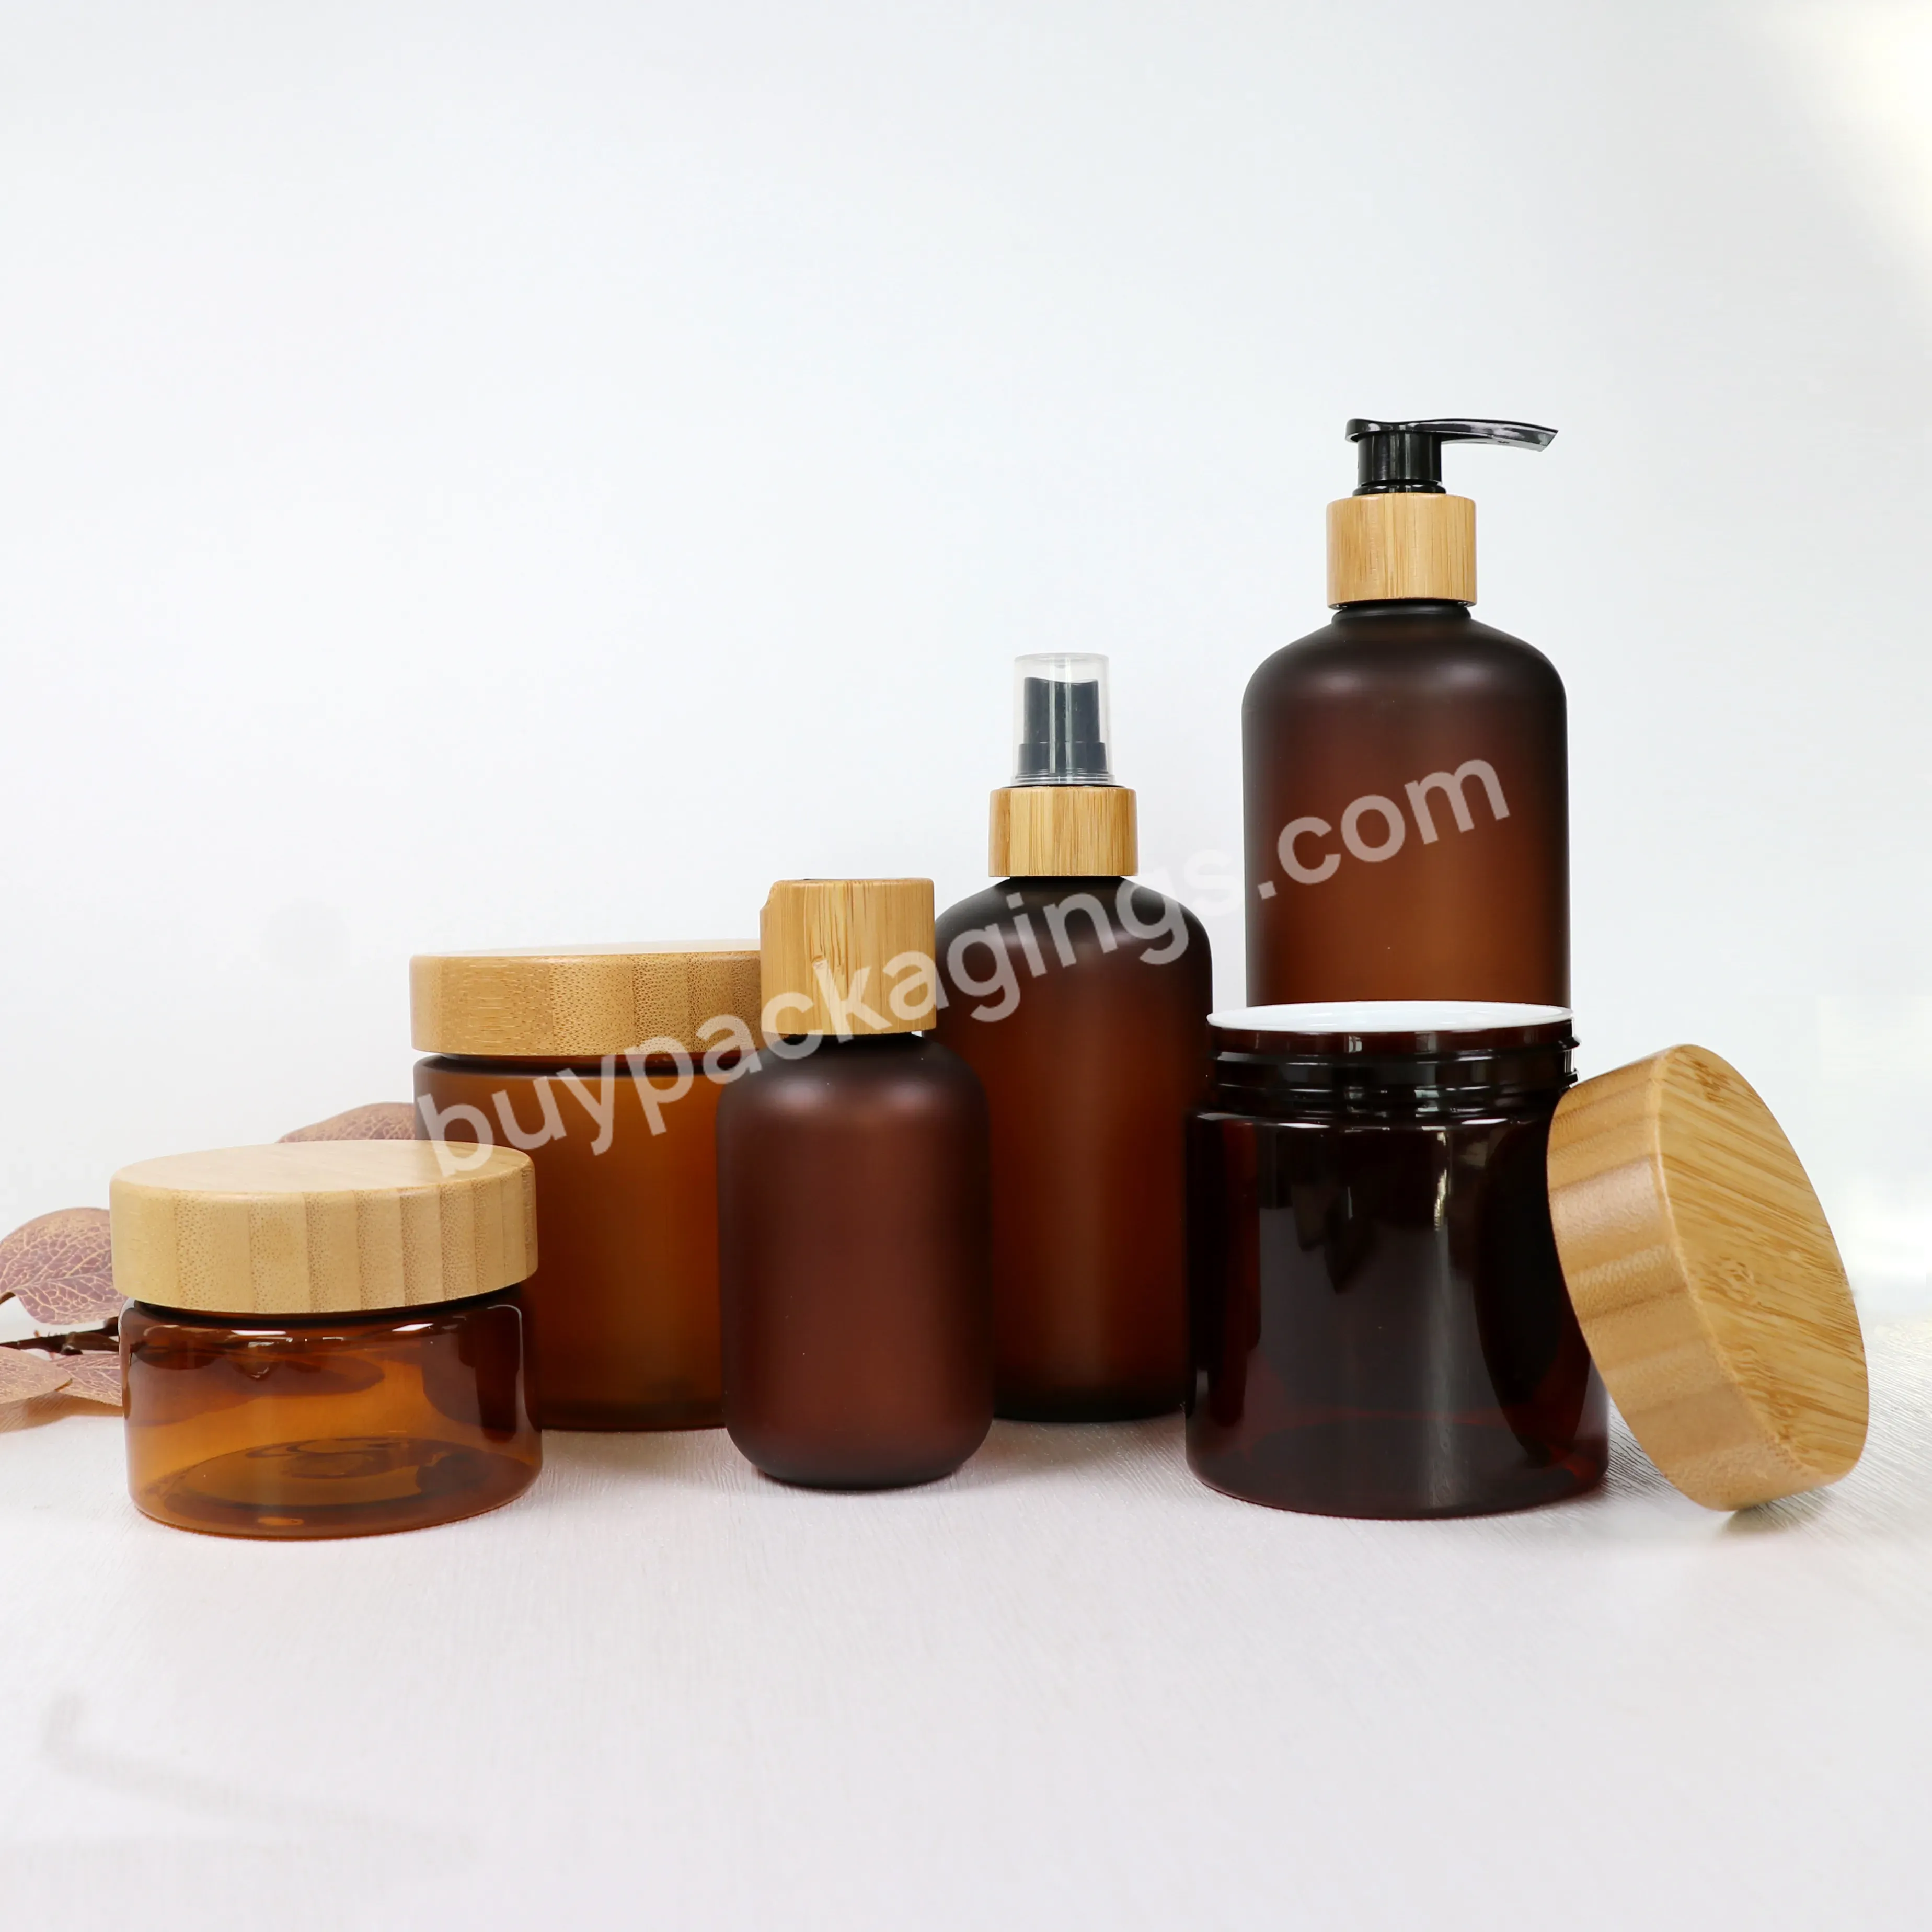 Skincare Cosmetic Essential Oil 50 Ml 120 Ml 250 Ml 500 Ml Pet Cream Jars And Lotion Hair Serum Bottles With Bamboo Pattern Lid - Buy Bamboo Raw Materials,Bamboo Producs 50 Ml 120 Ml 250 Ml 500 Ml,Skincare Cosmetic.